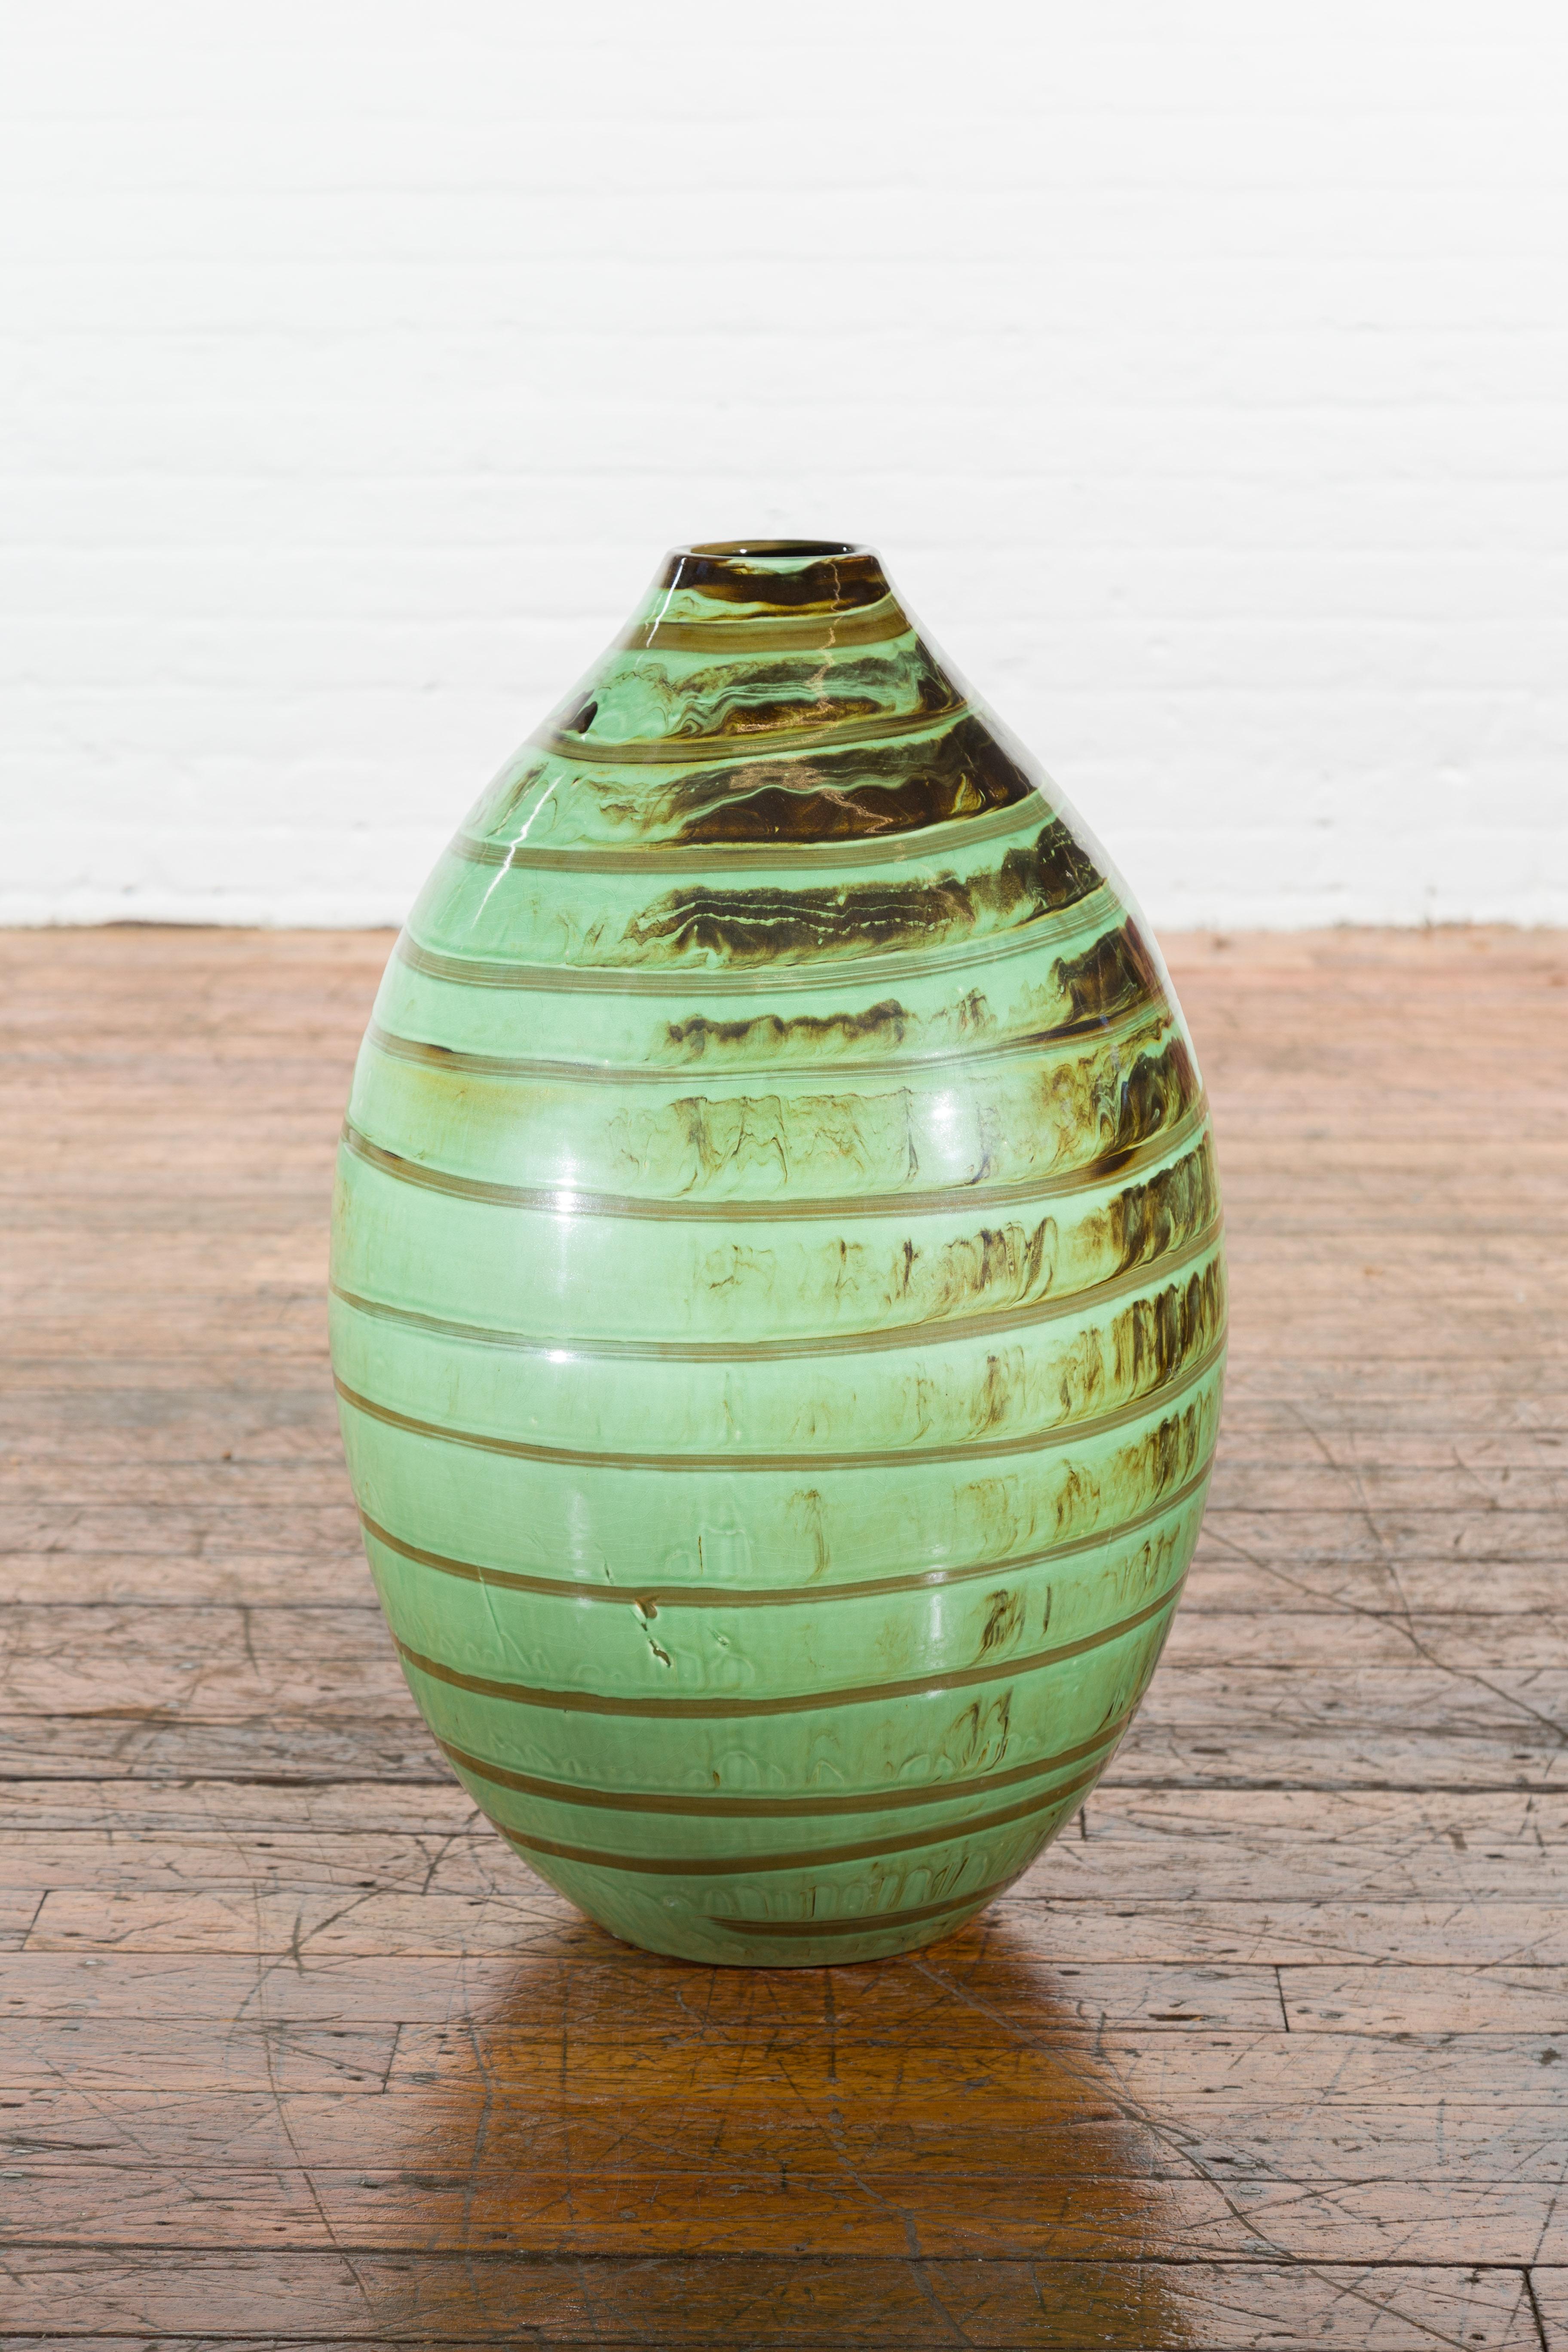 Artisan Contemporary Green and Brown Glaze Ceramic Vase with Spiral Decor For Sale 4